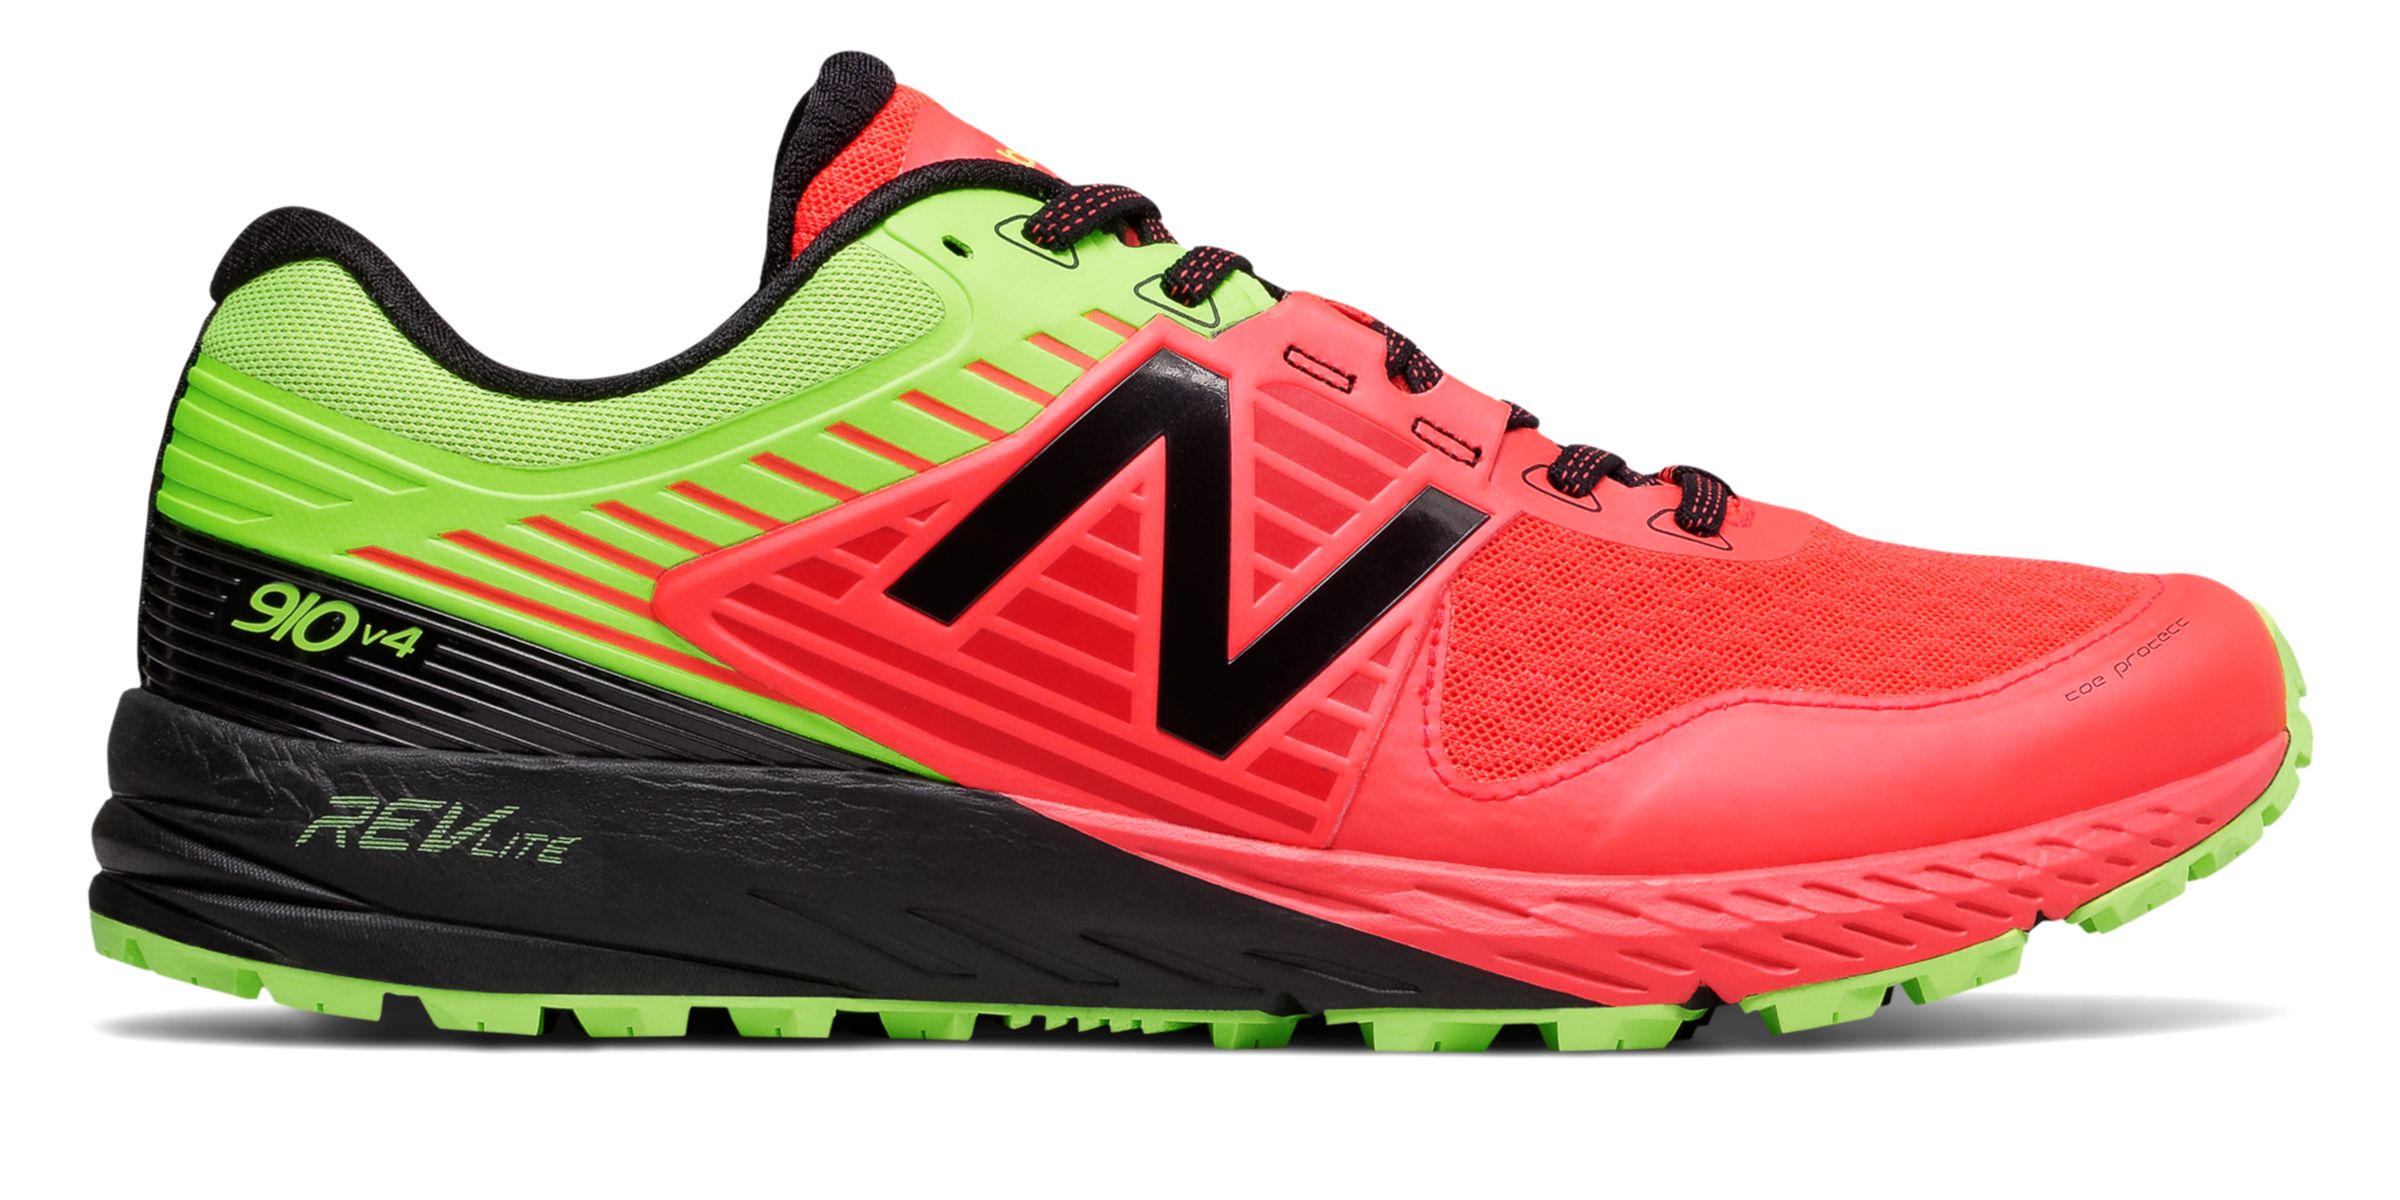 New Balance MT910-V4 on Sale - Discounts Up to 20% Off on MT910RG4 at Joe's New  Balance Outlet